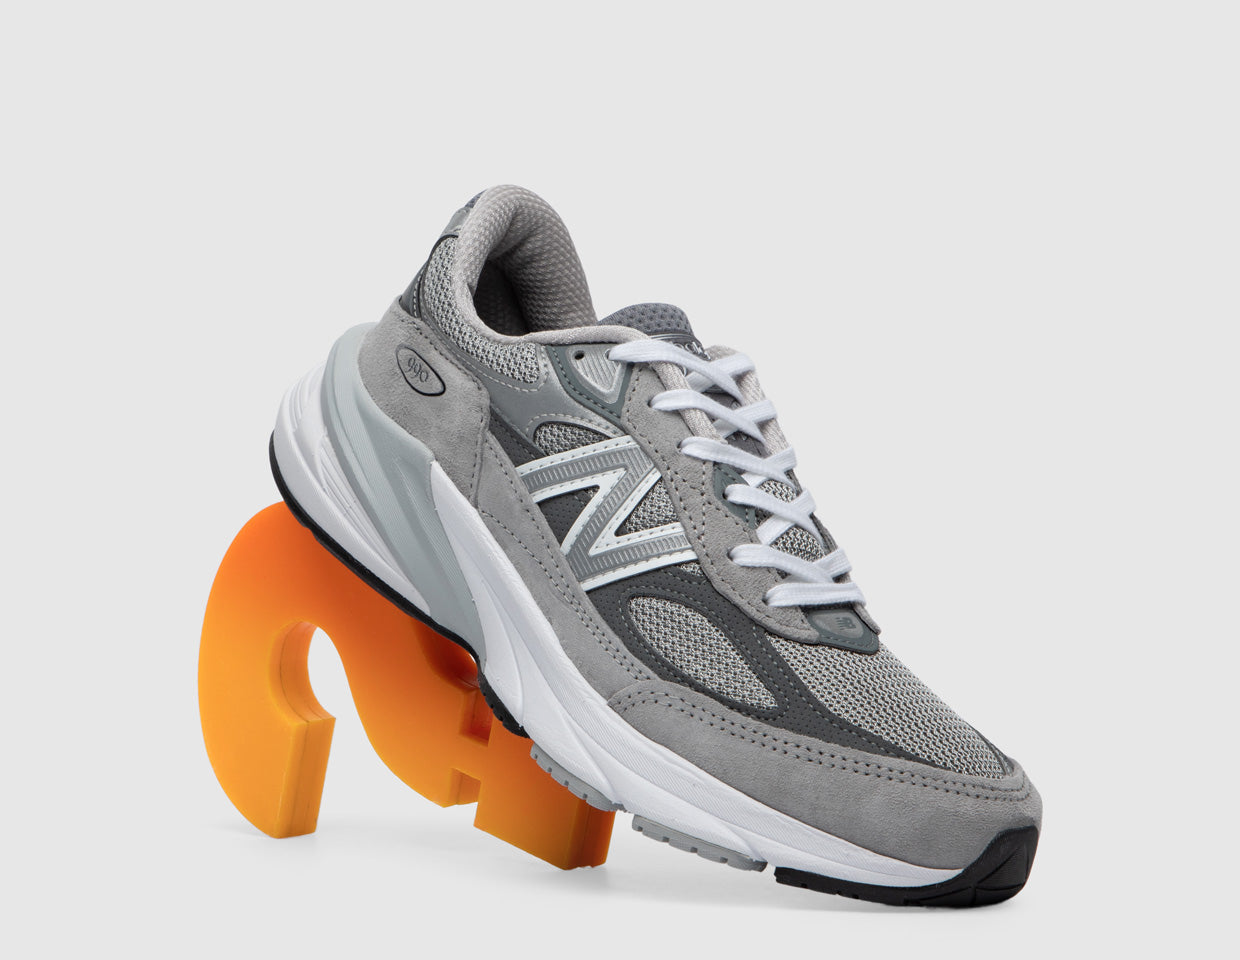 New Balance Shoes, Sneakers and Footwear | size? Canada